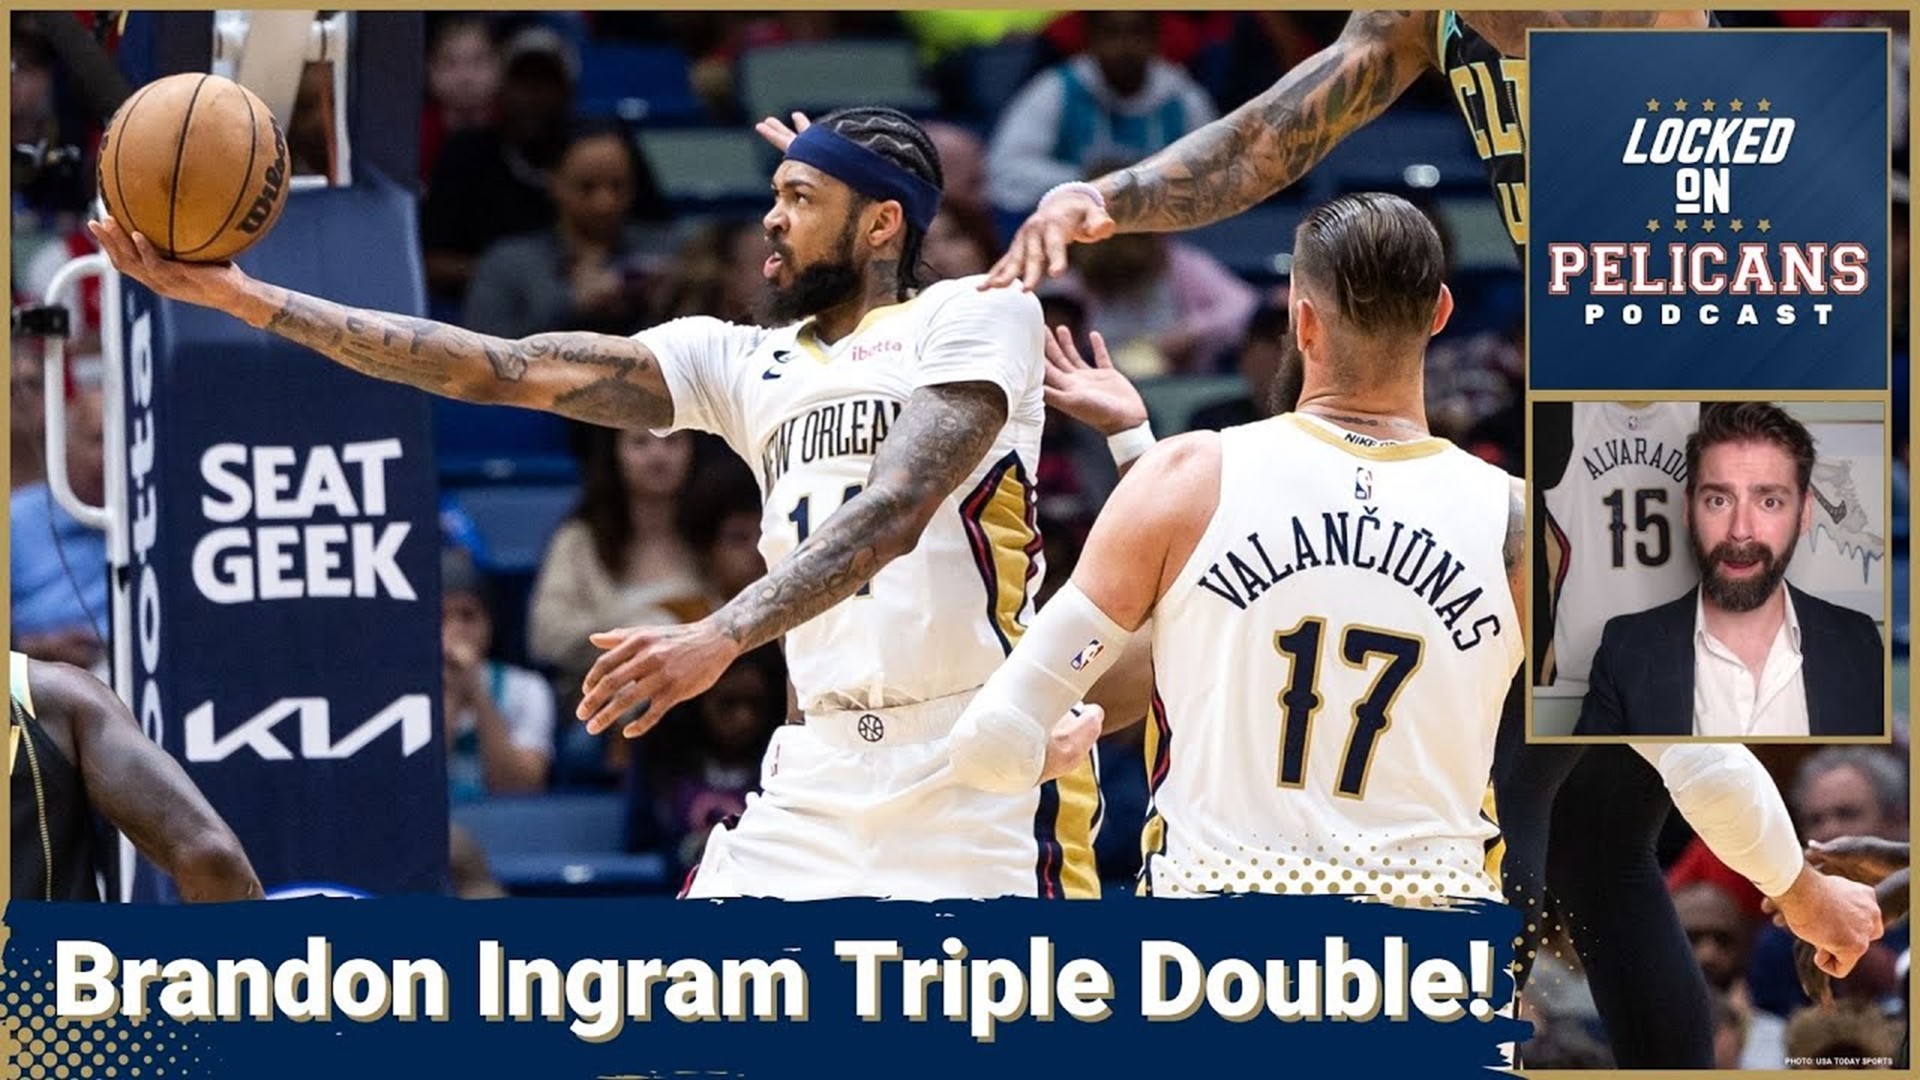 Brandon Ingram put up his first career triple double as the New Orleans Pelicans won their third straight game.